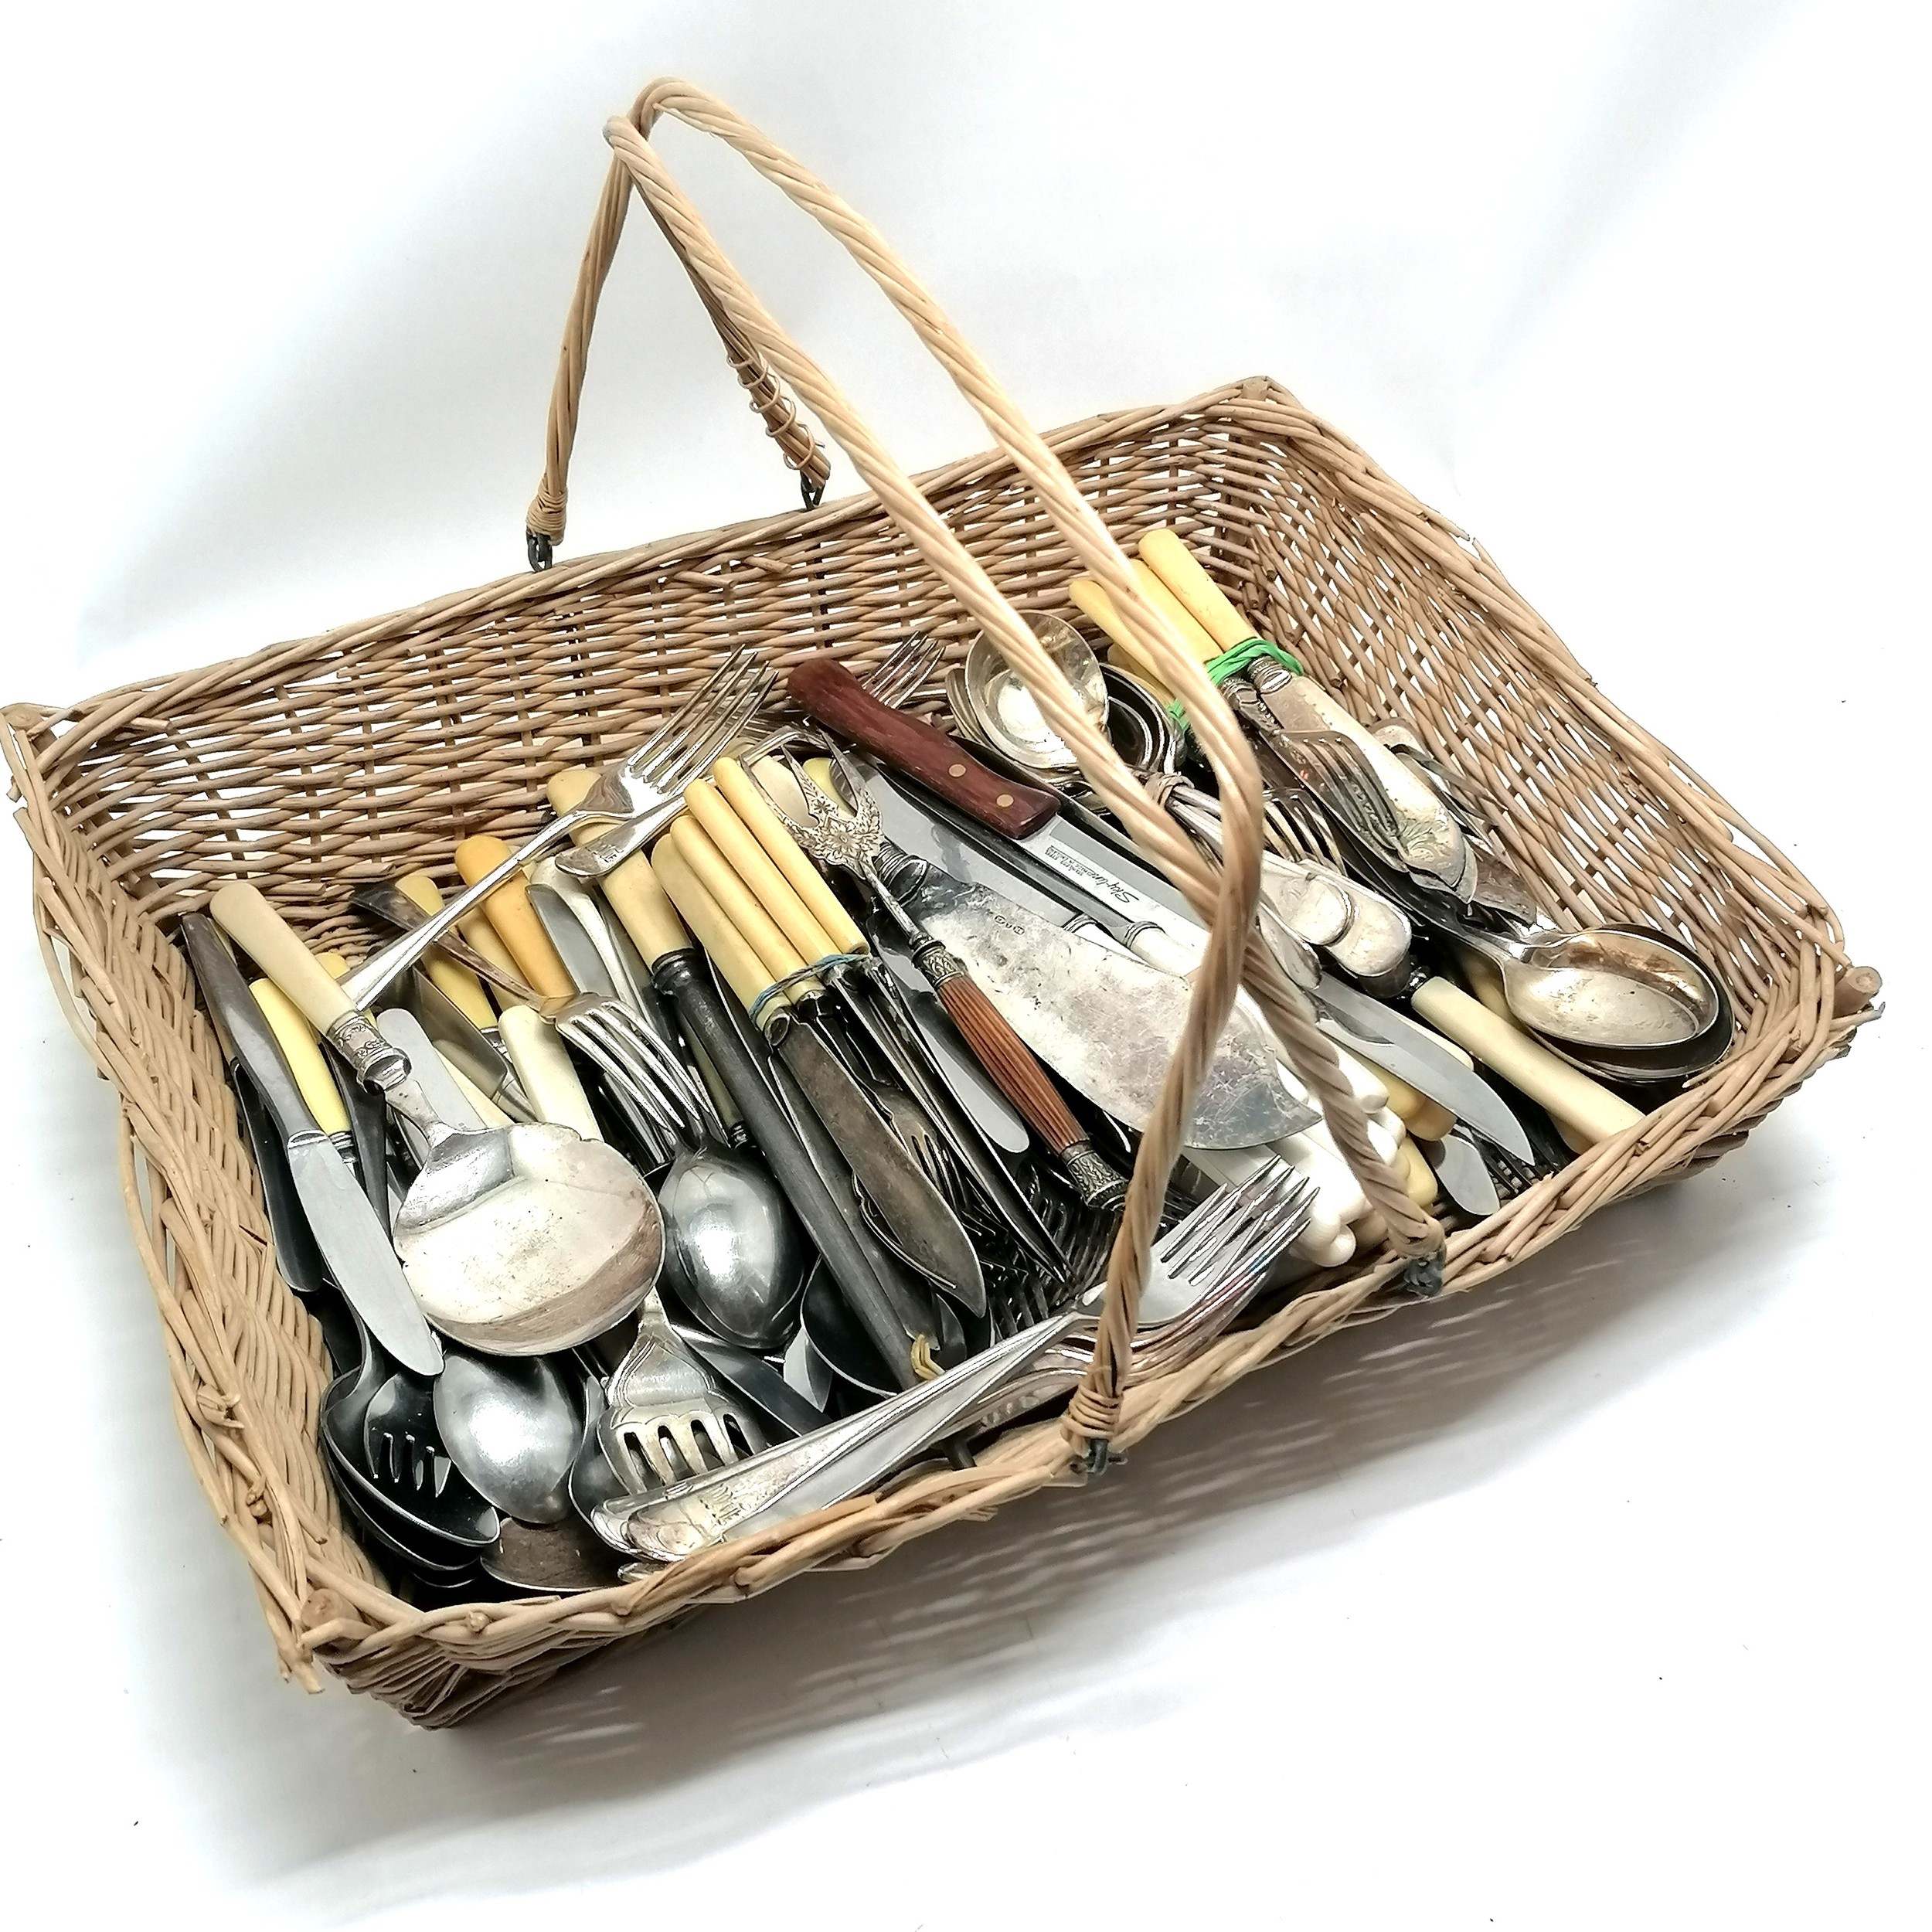 Quantity of loose flatware incl. a horn handled bread fork in a handled wicker basket